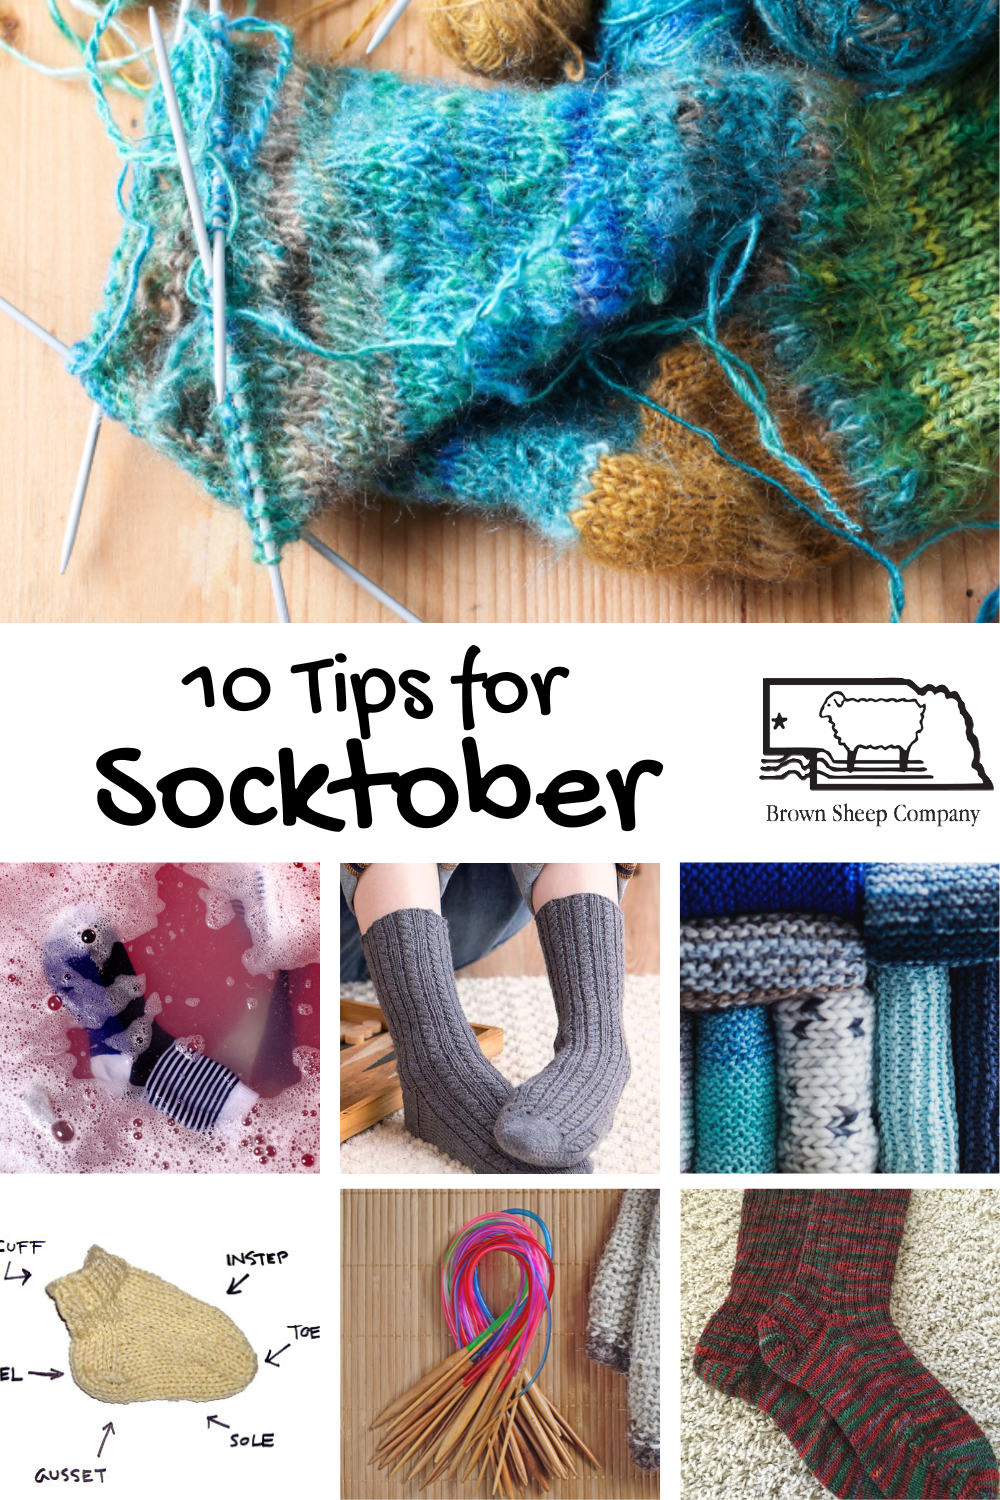 Things I will and won't do again in cuff-down knitted socks